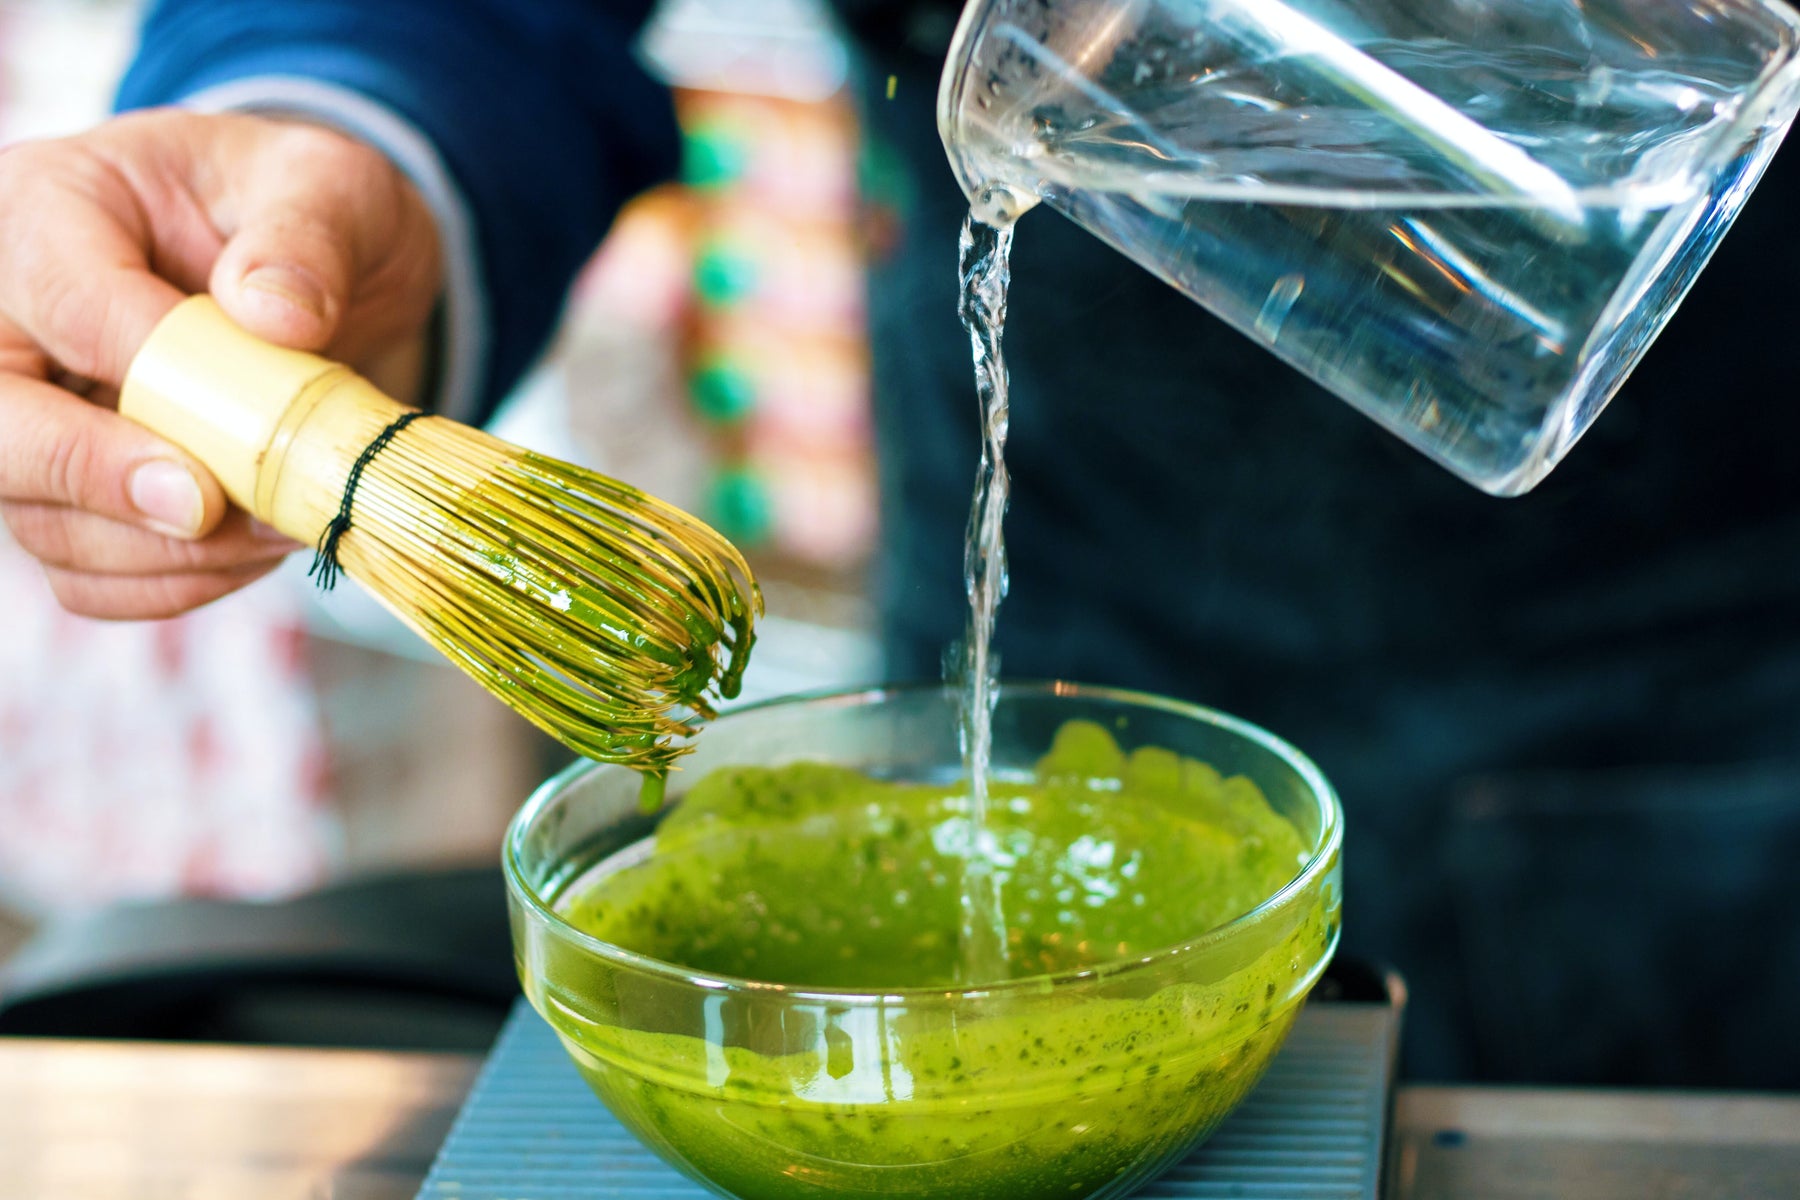 How to Make the Perfect Cup of Matcha